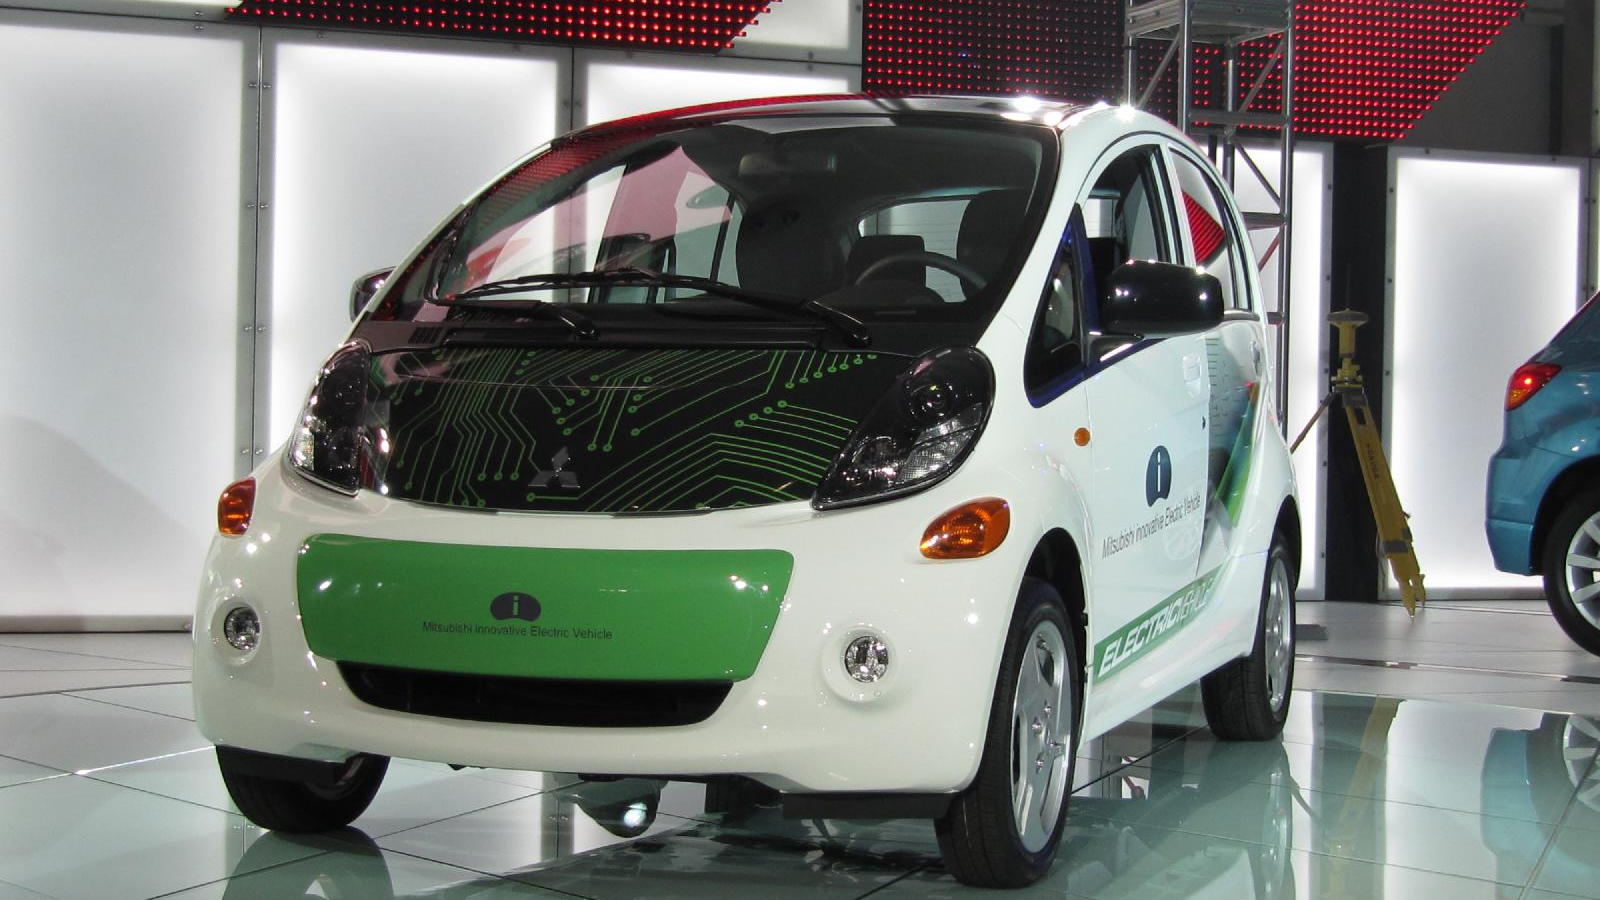 2012 Mitsubishi "i" electric car, powered by MiEV, launch event at 2010 Los Angeles Auto Show